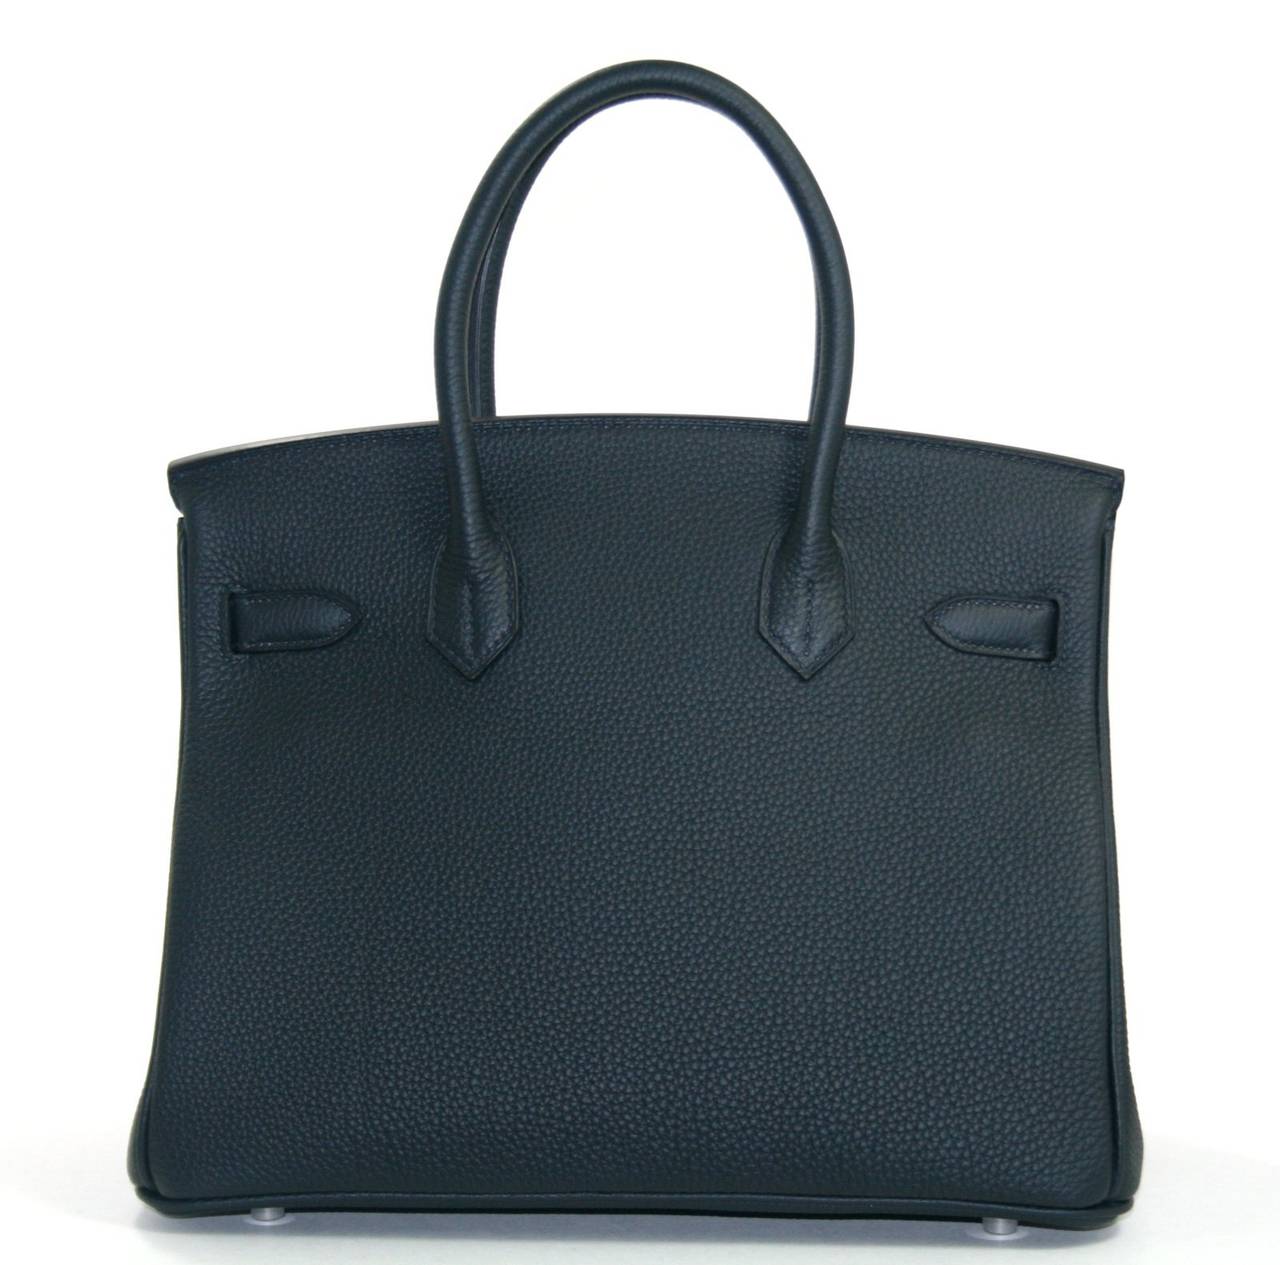 Pristine, store fresh condition (plastic on hardware) Hermès Birkin Bag in Blue Ocean (black color) Togo, 35 cm size.   Crafted by hand and considered by many as the epitome of luxury items, Birkins are extremely difficult to get. Scratch resistant